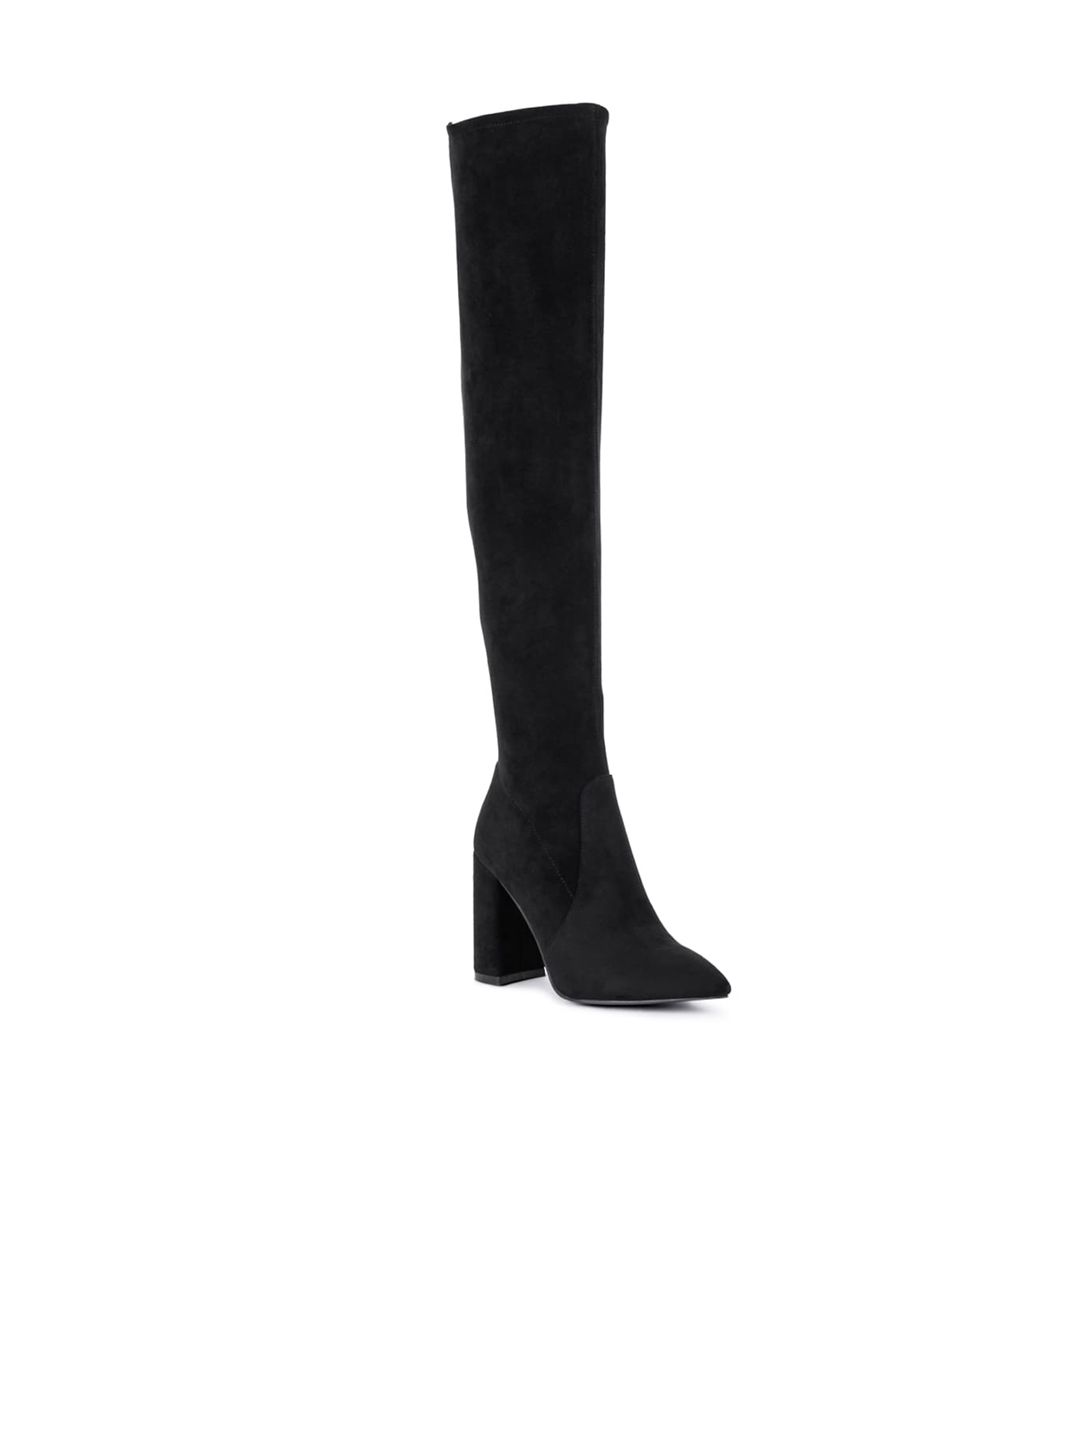 London Rag Women Black Solid Suede High-Top Heeled Boots Price in India